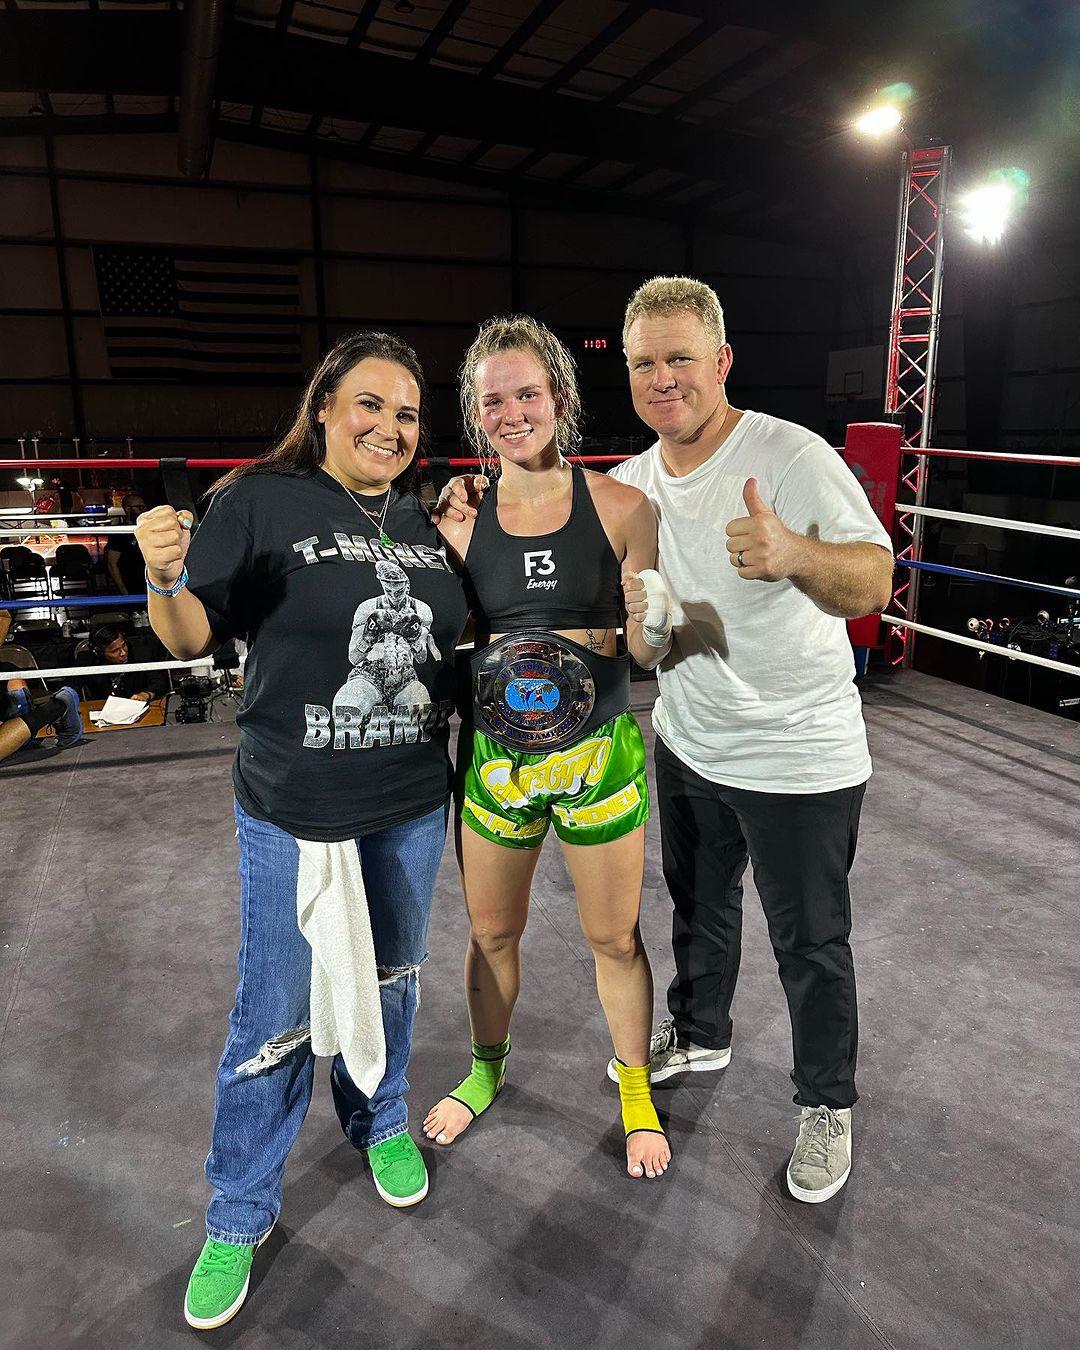 Tierra Brandt books her place at the 2023 World Combat Games pic